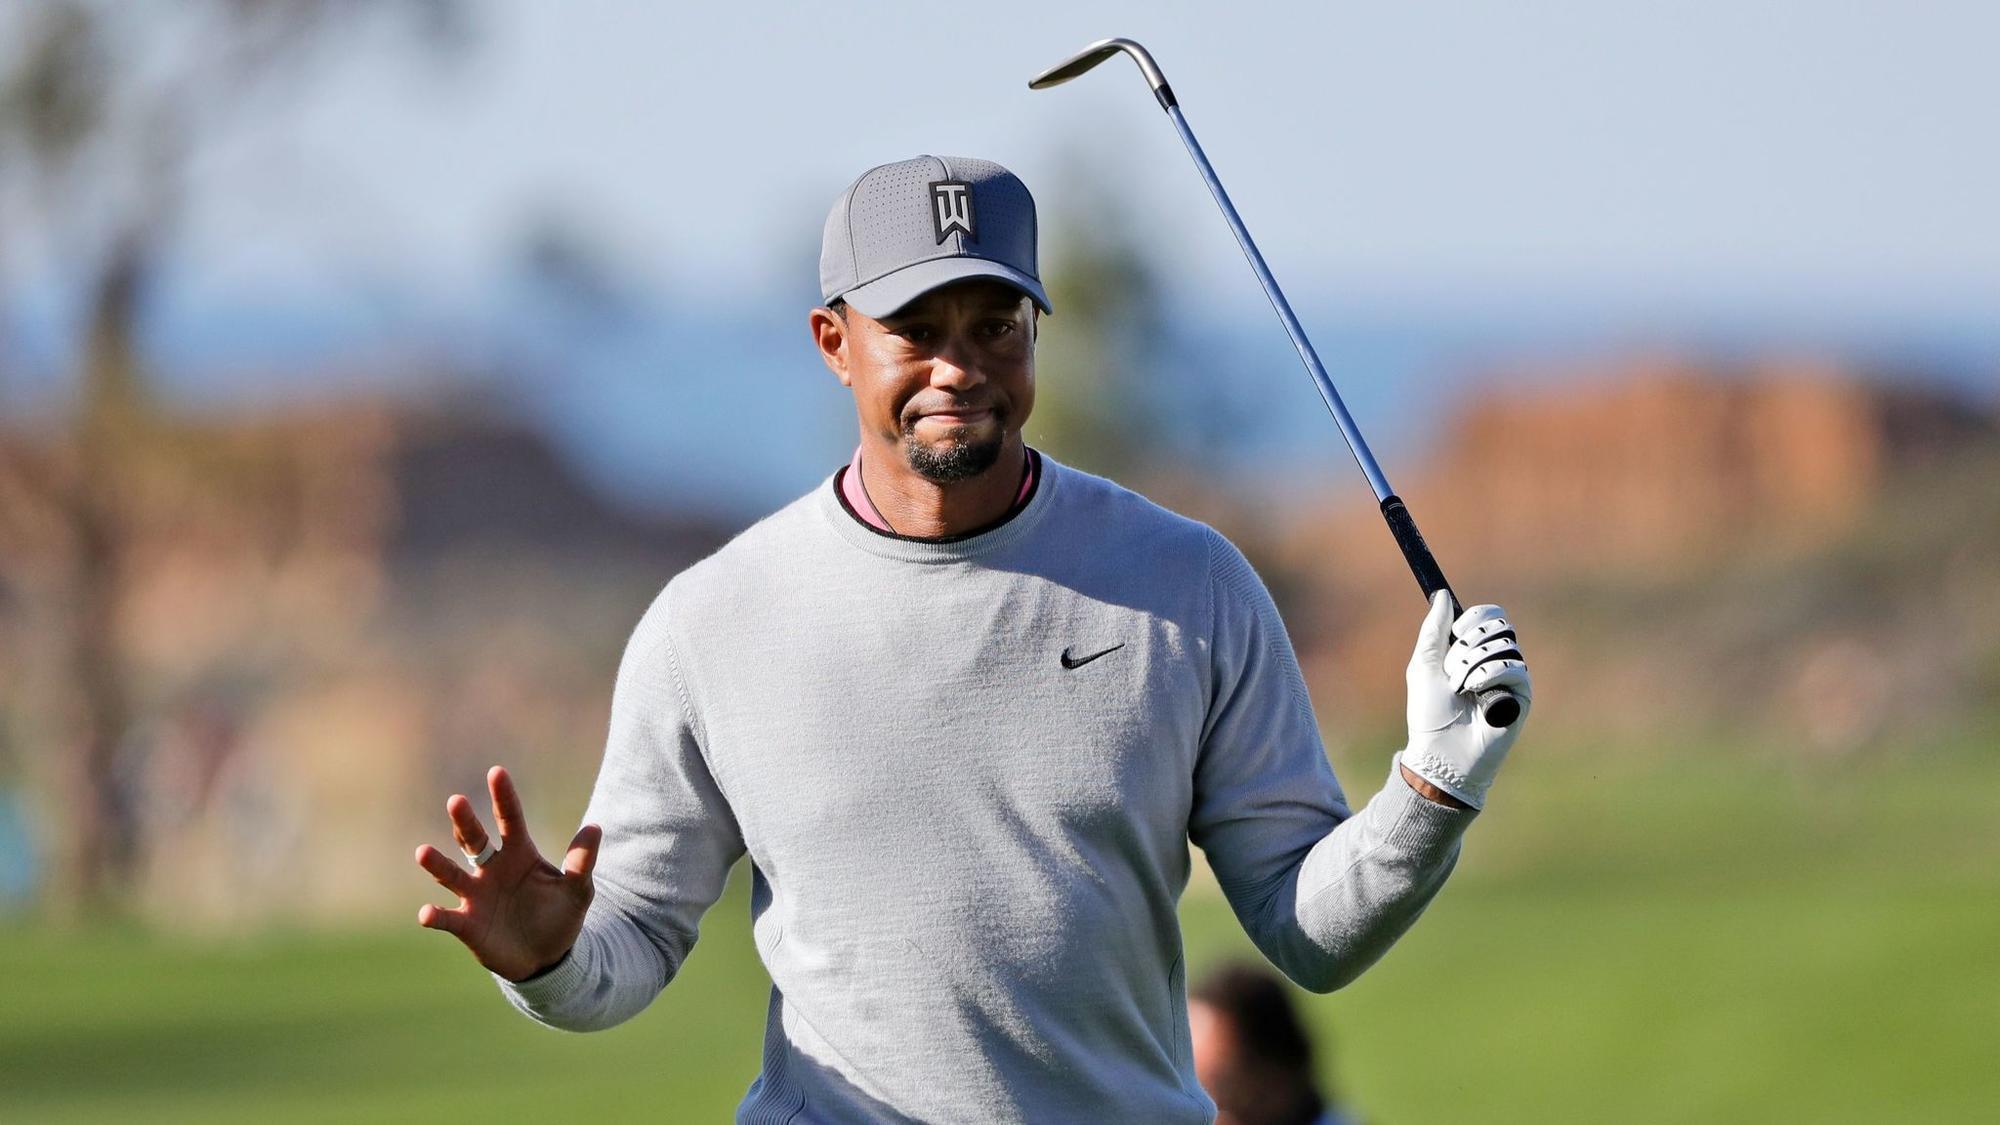 Is Torrey Pines too tough for an aging Tiger Woods?